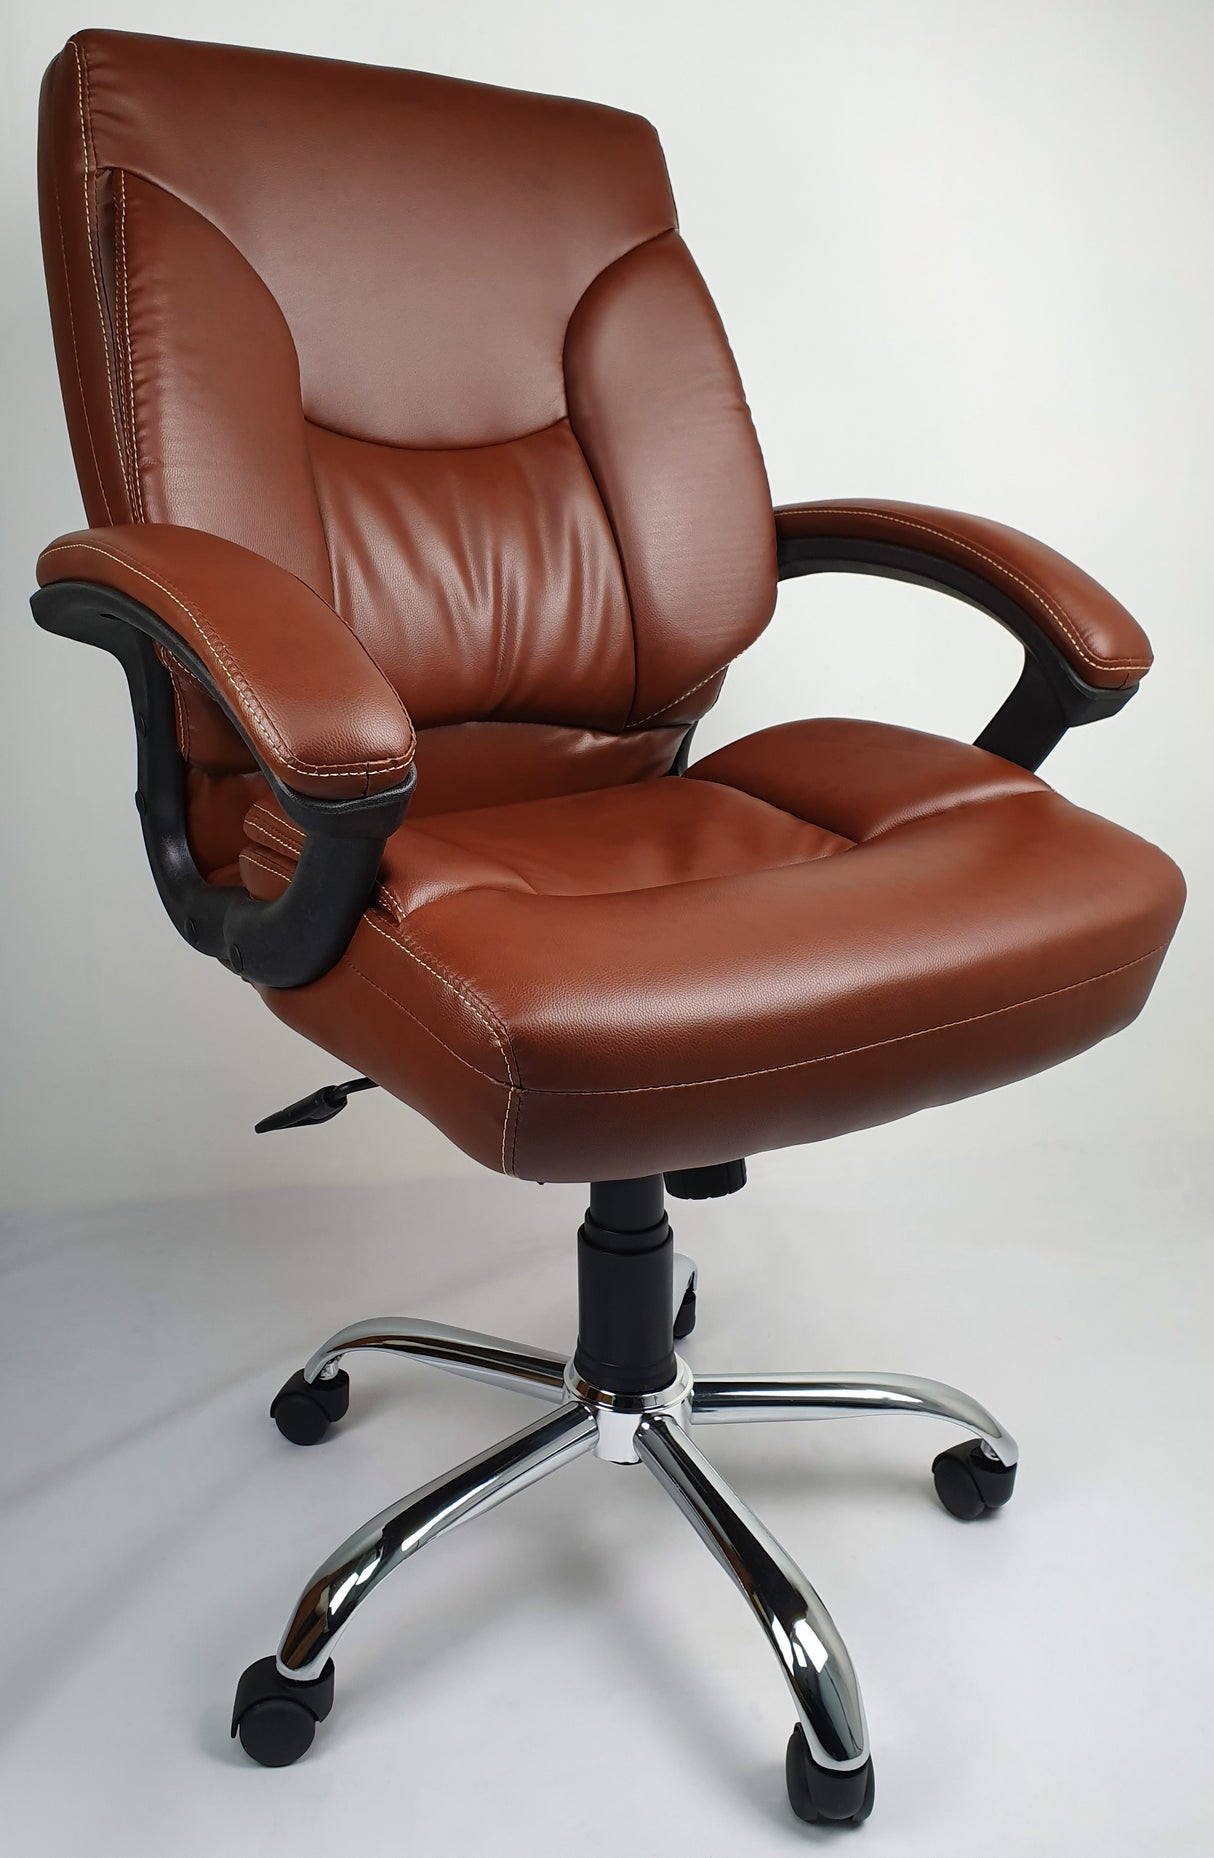 Medium Back Brown Leather Office Chair - HF459-1